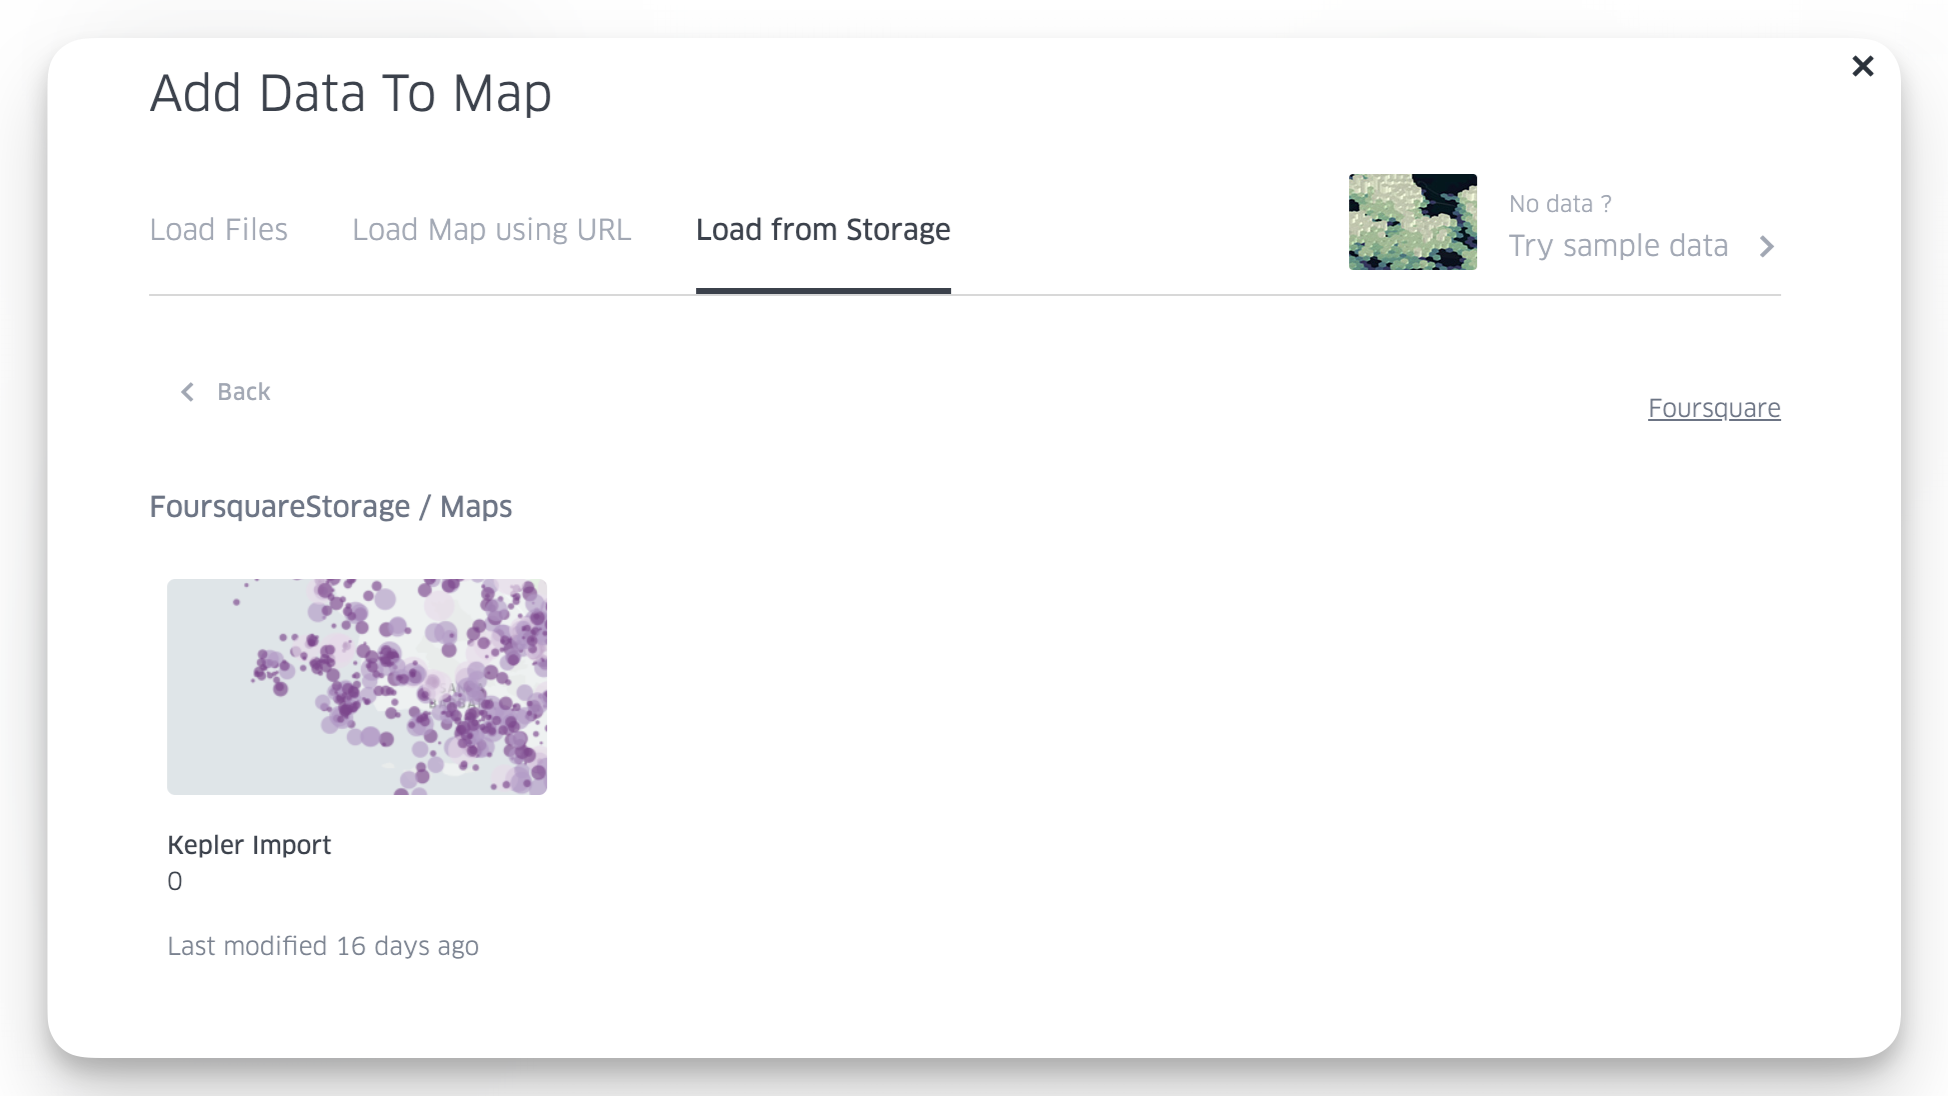 The load from storage tab shows maps saved to your Studio account.